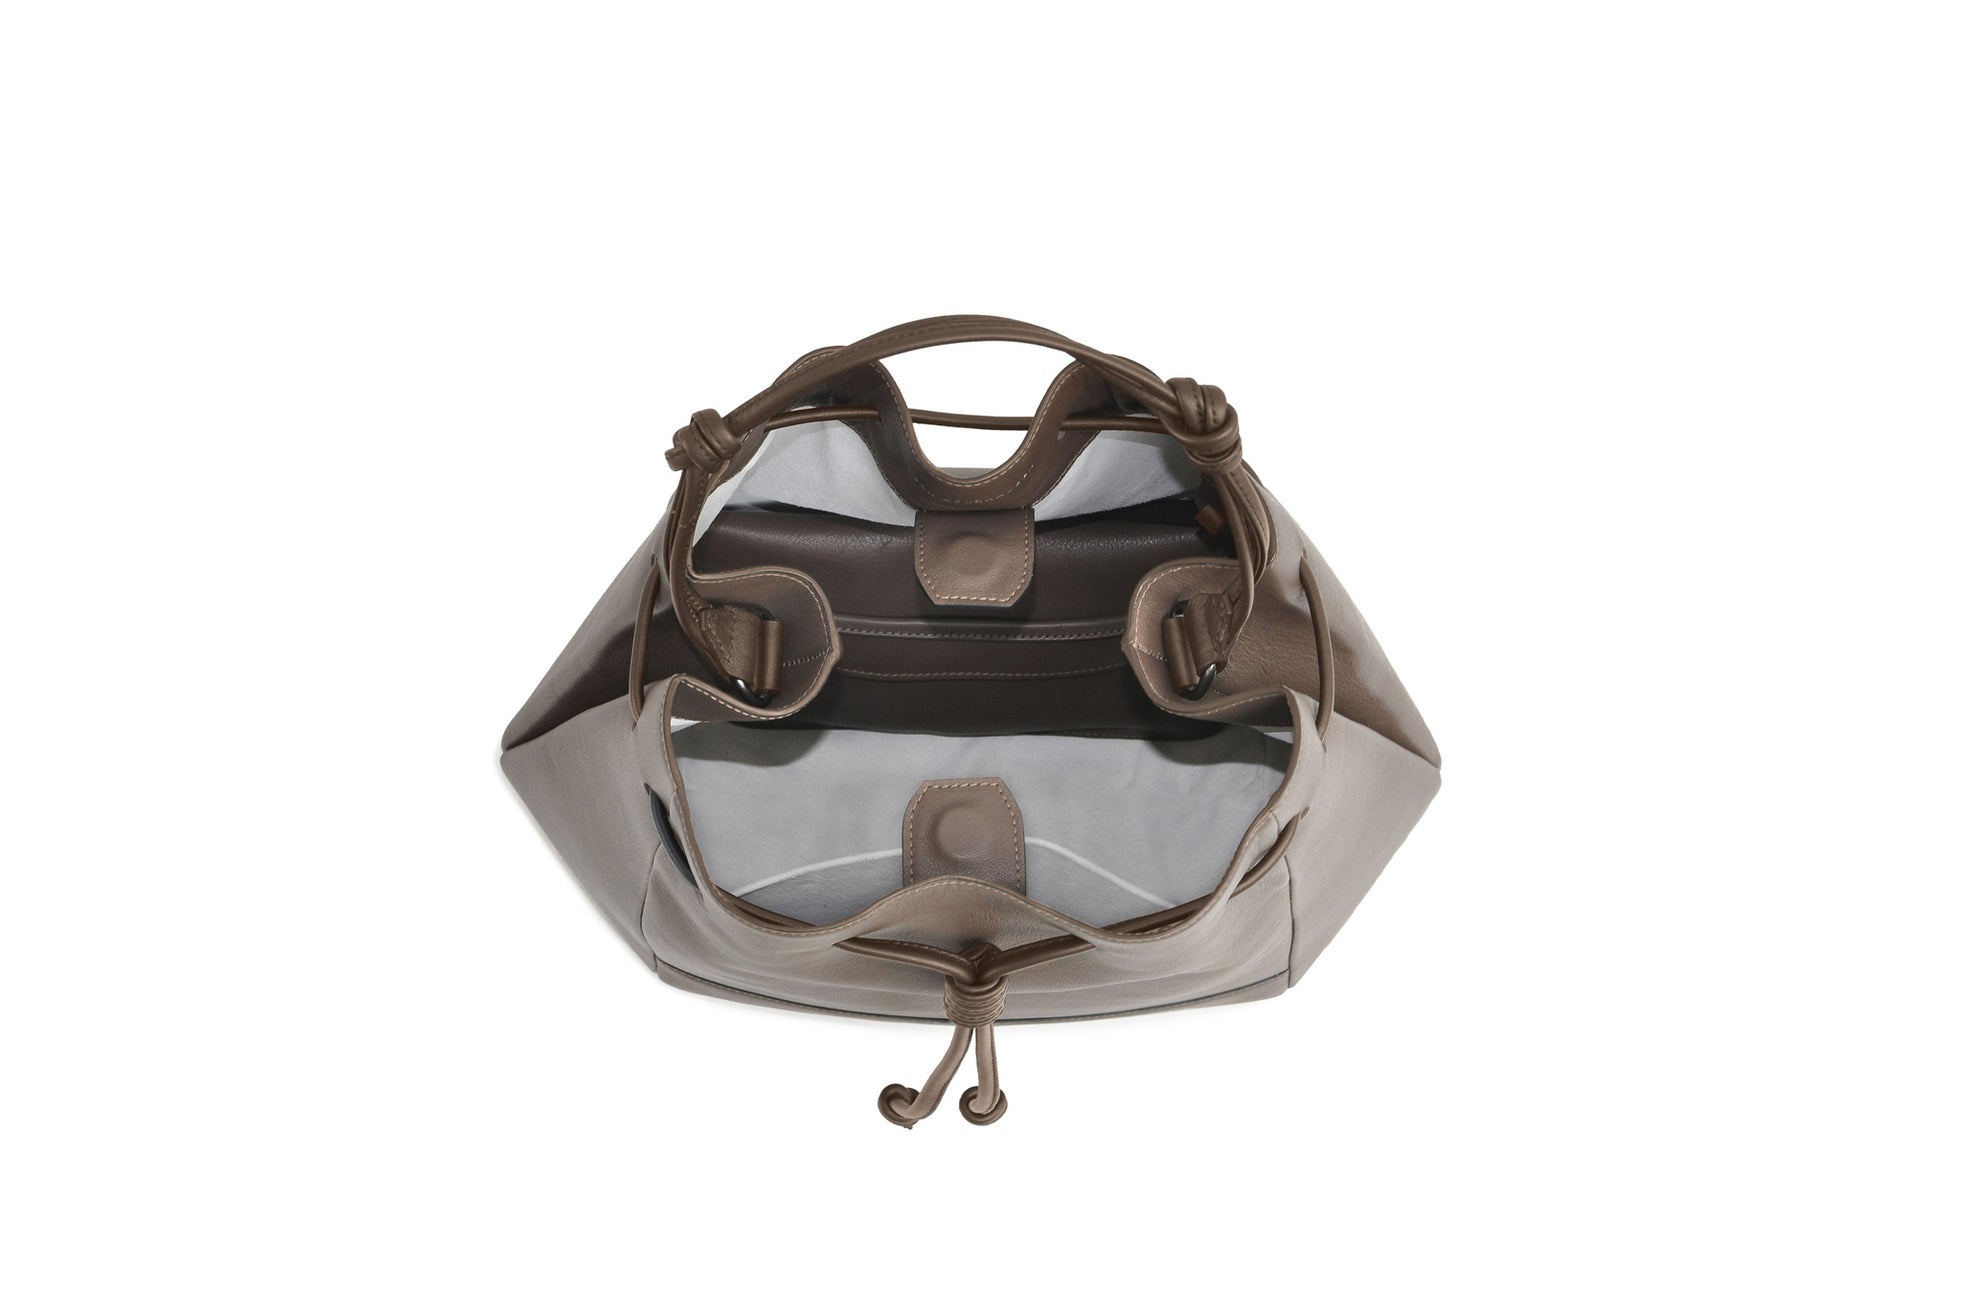 The Large Bucket Backpack - Sample Sale in Technik in Taupe image 5